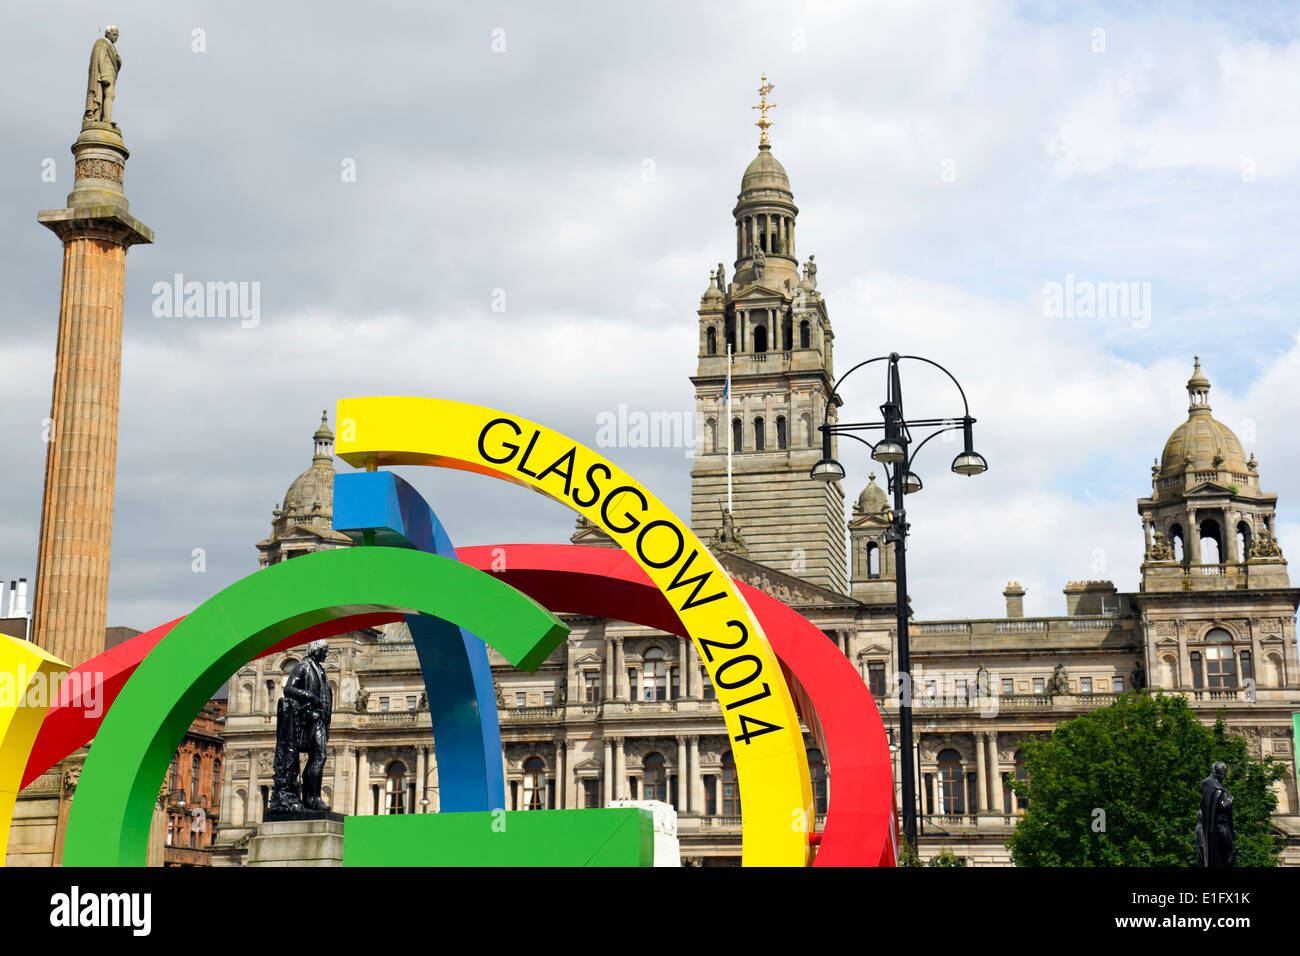 Detail of the Glasgow 2014 Commonwealth Games Logo The Big G on George Square in Glasgow city centre, Scotland, UK Stock Photo